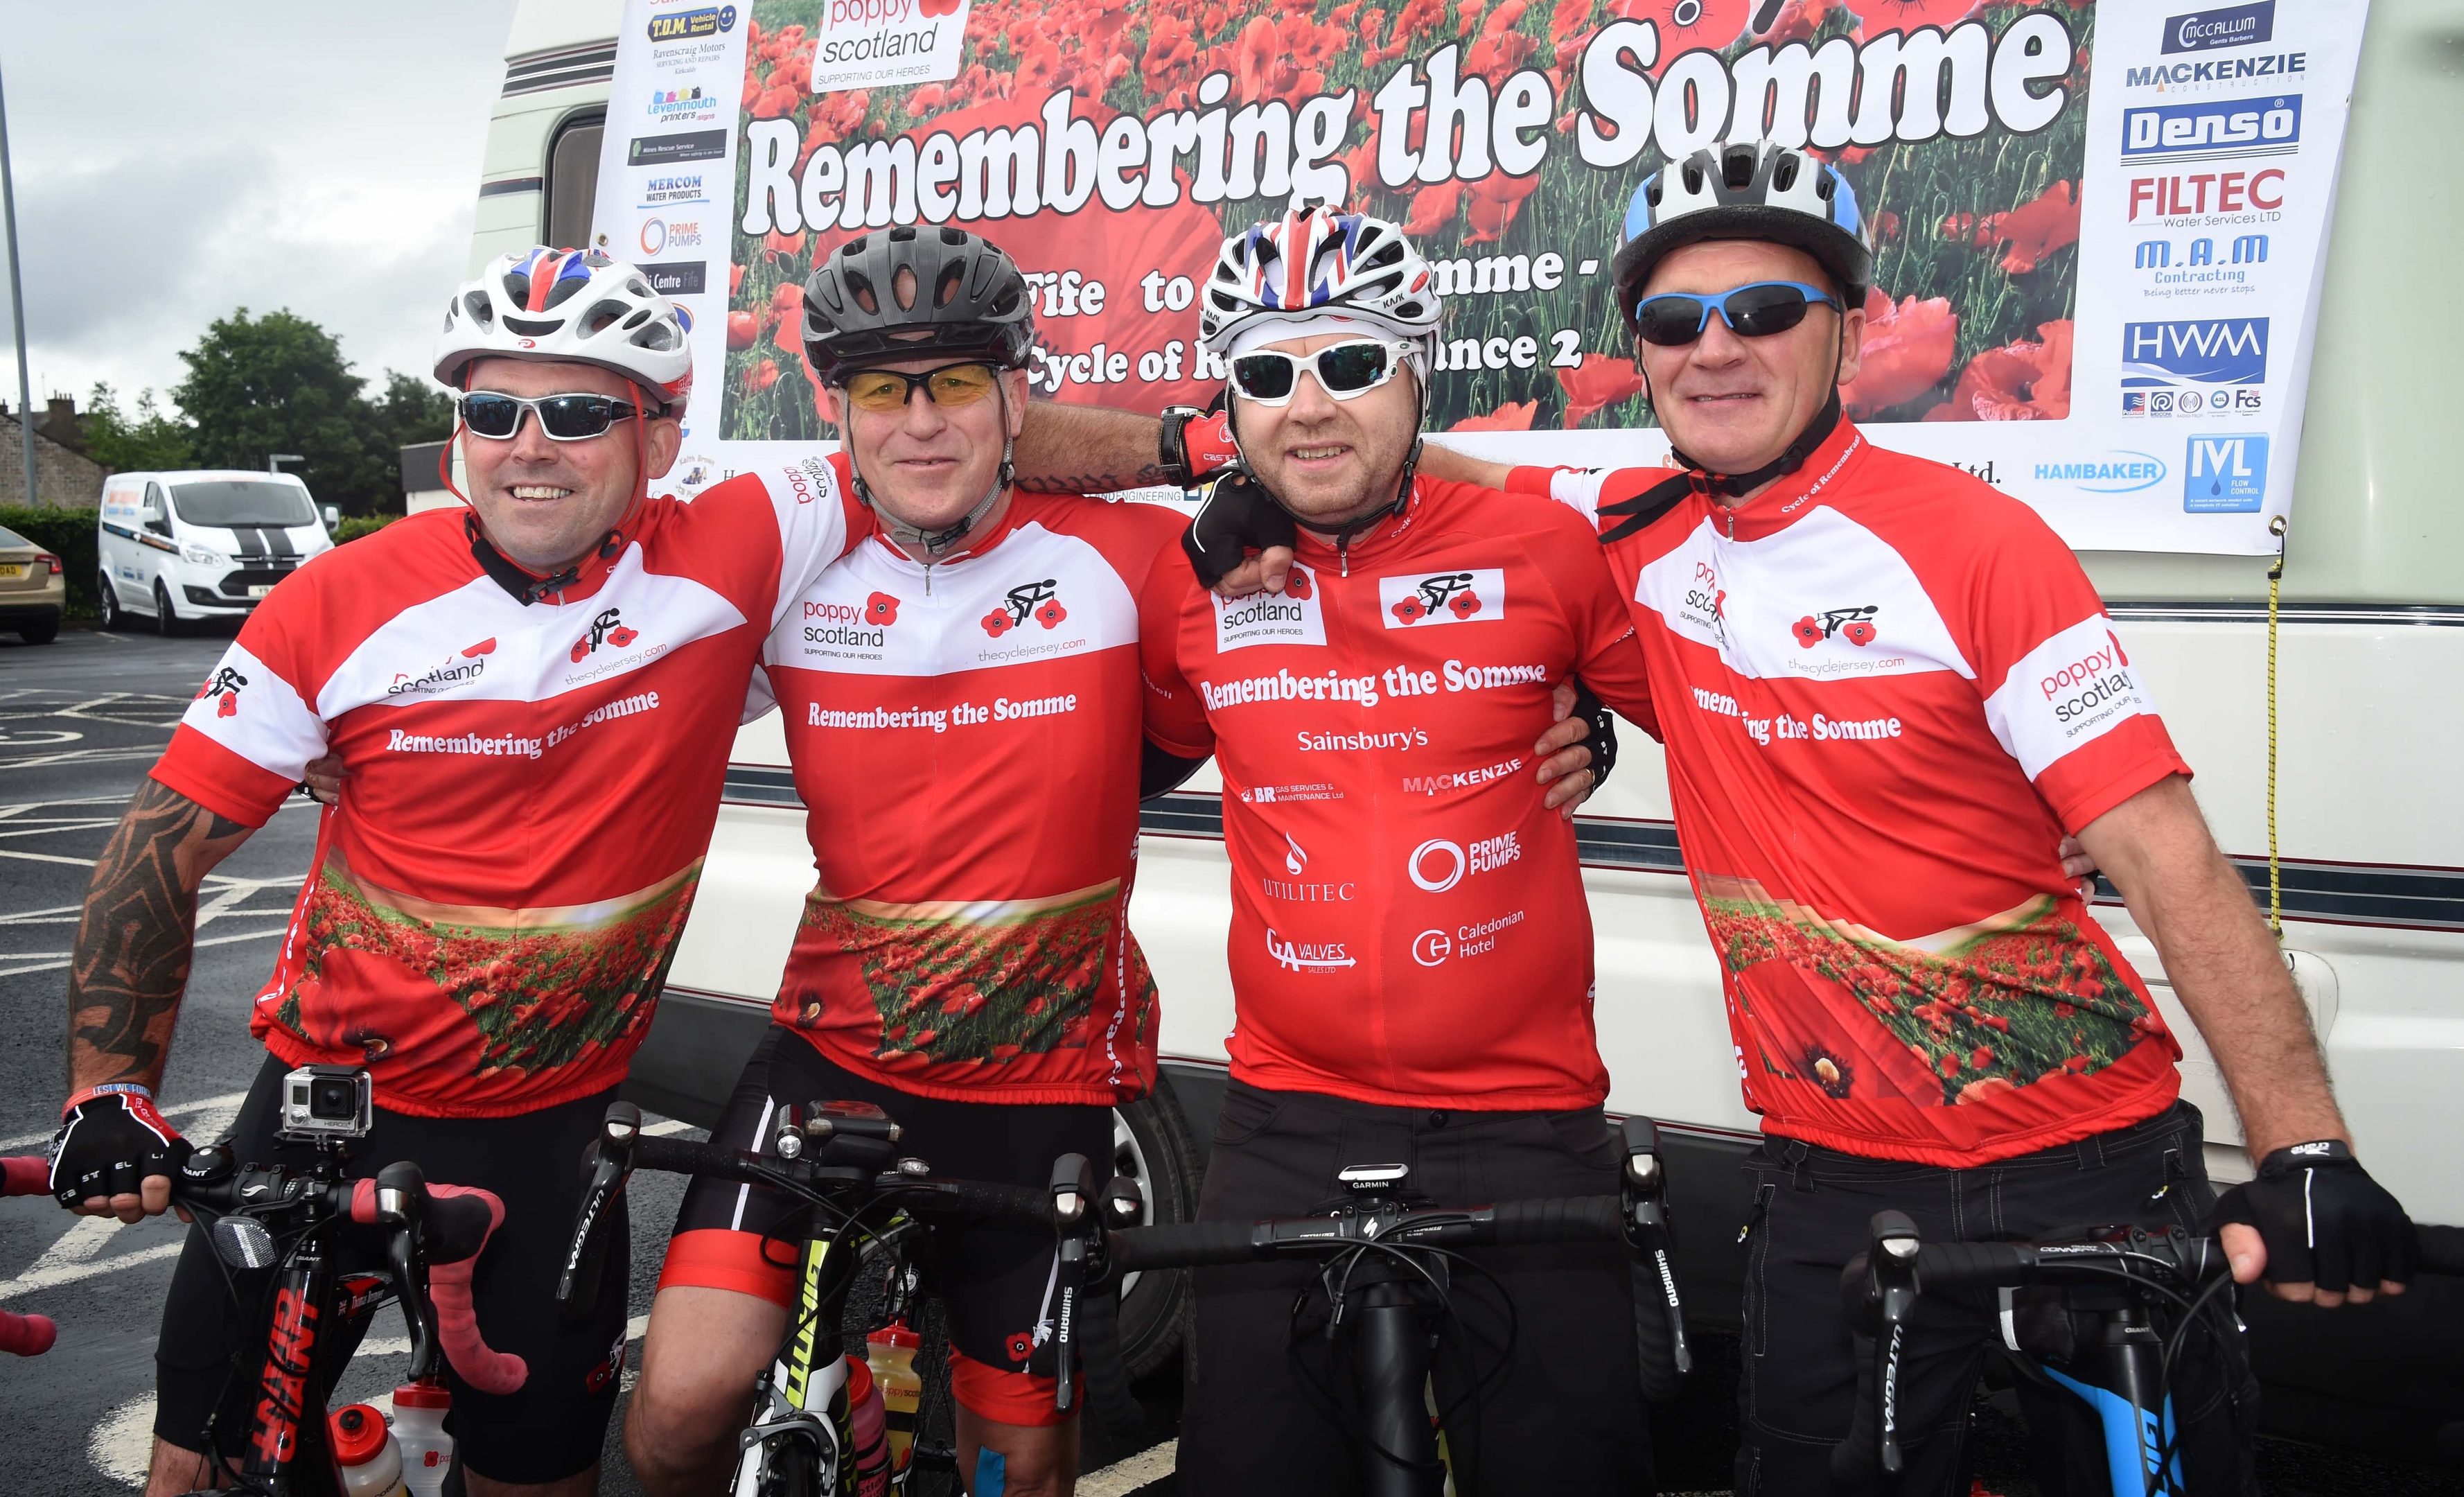 Thomas Bremner, Mark Young, John Duffin and Sandy Cunningham are on the Cycle of Remembrance